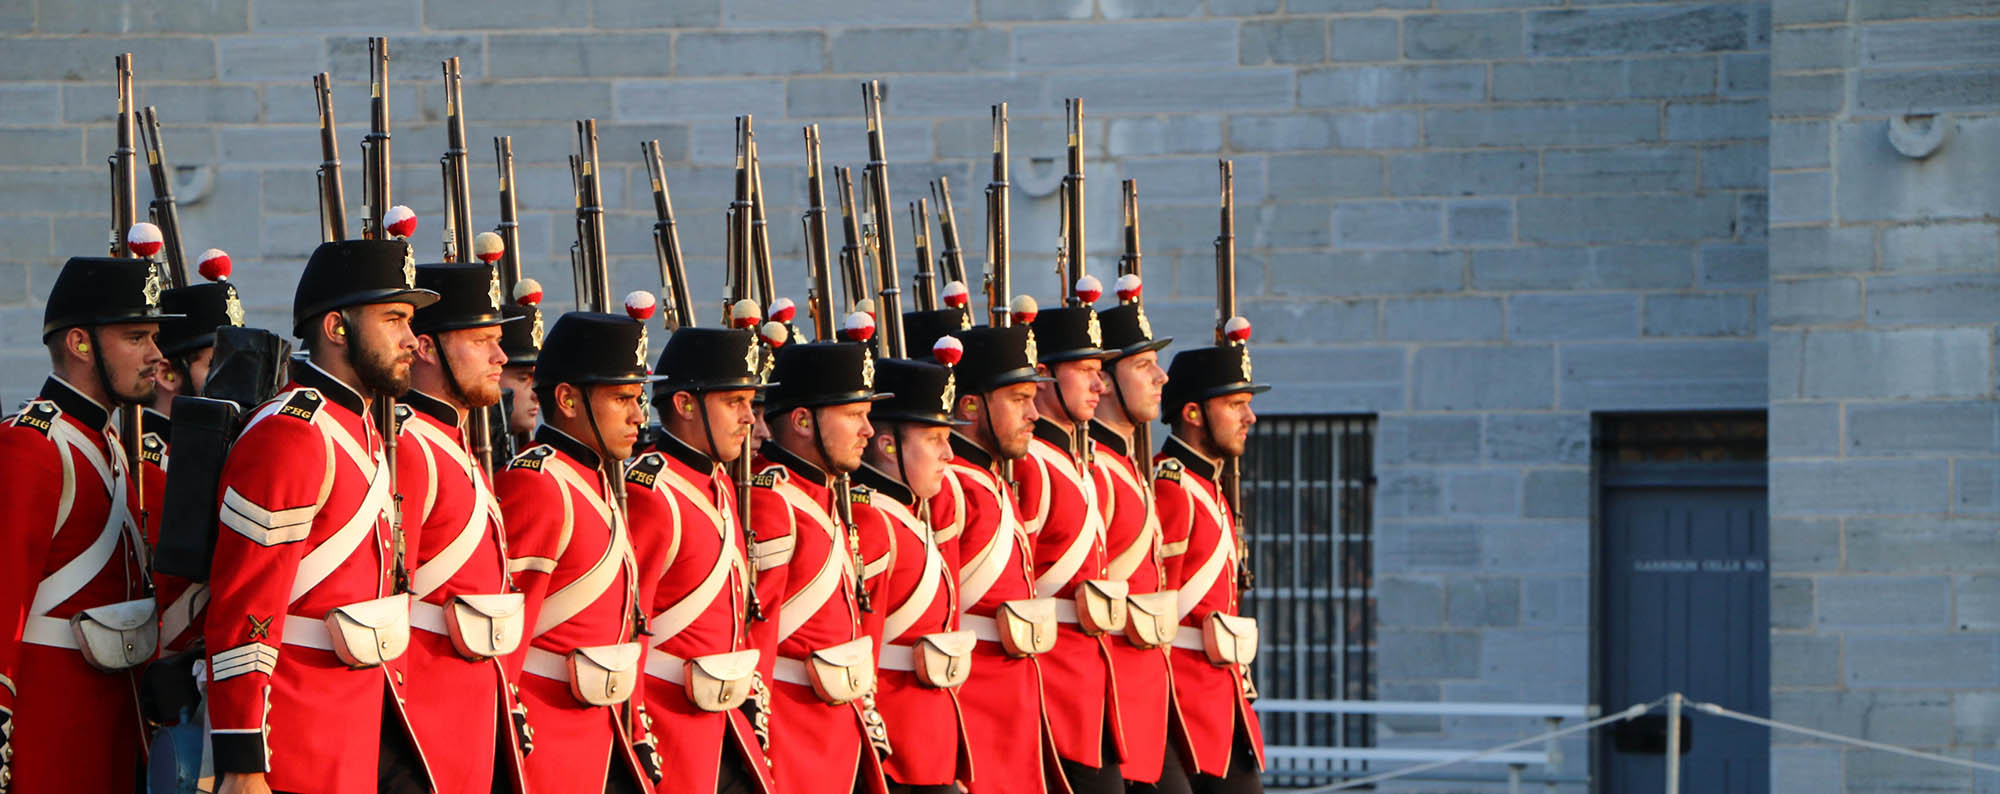 fort henry guard in red British uniforms marching